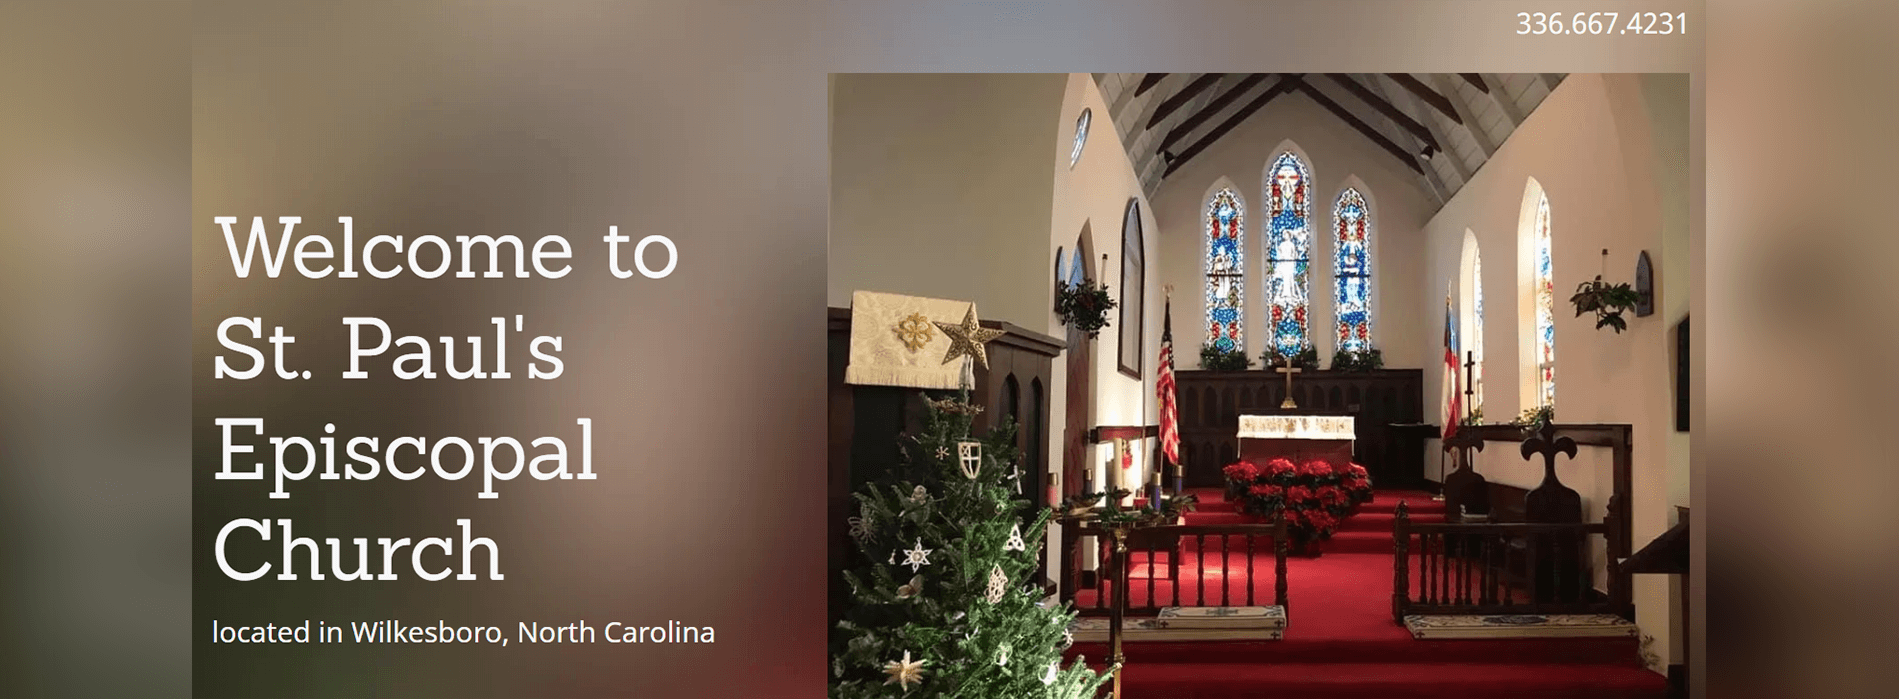 Welcome to St.Paul's Episcopal Church